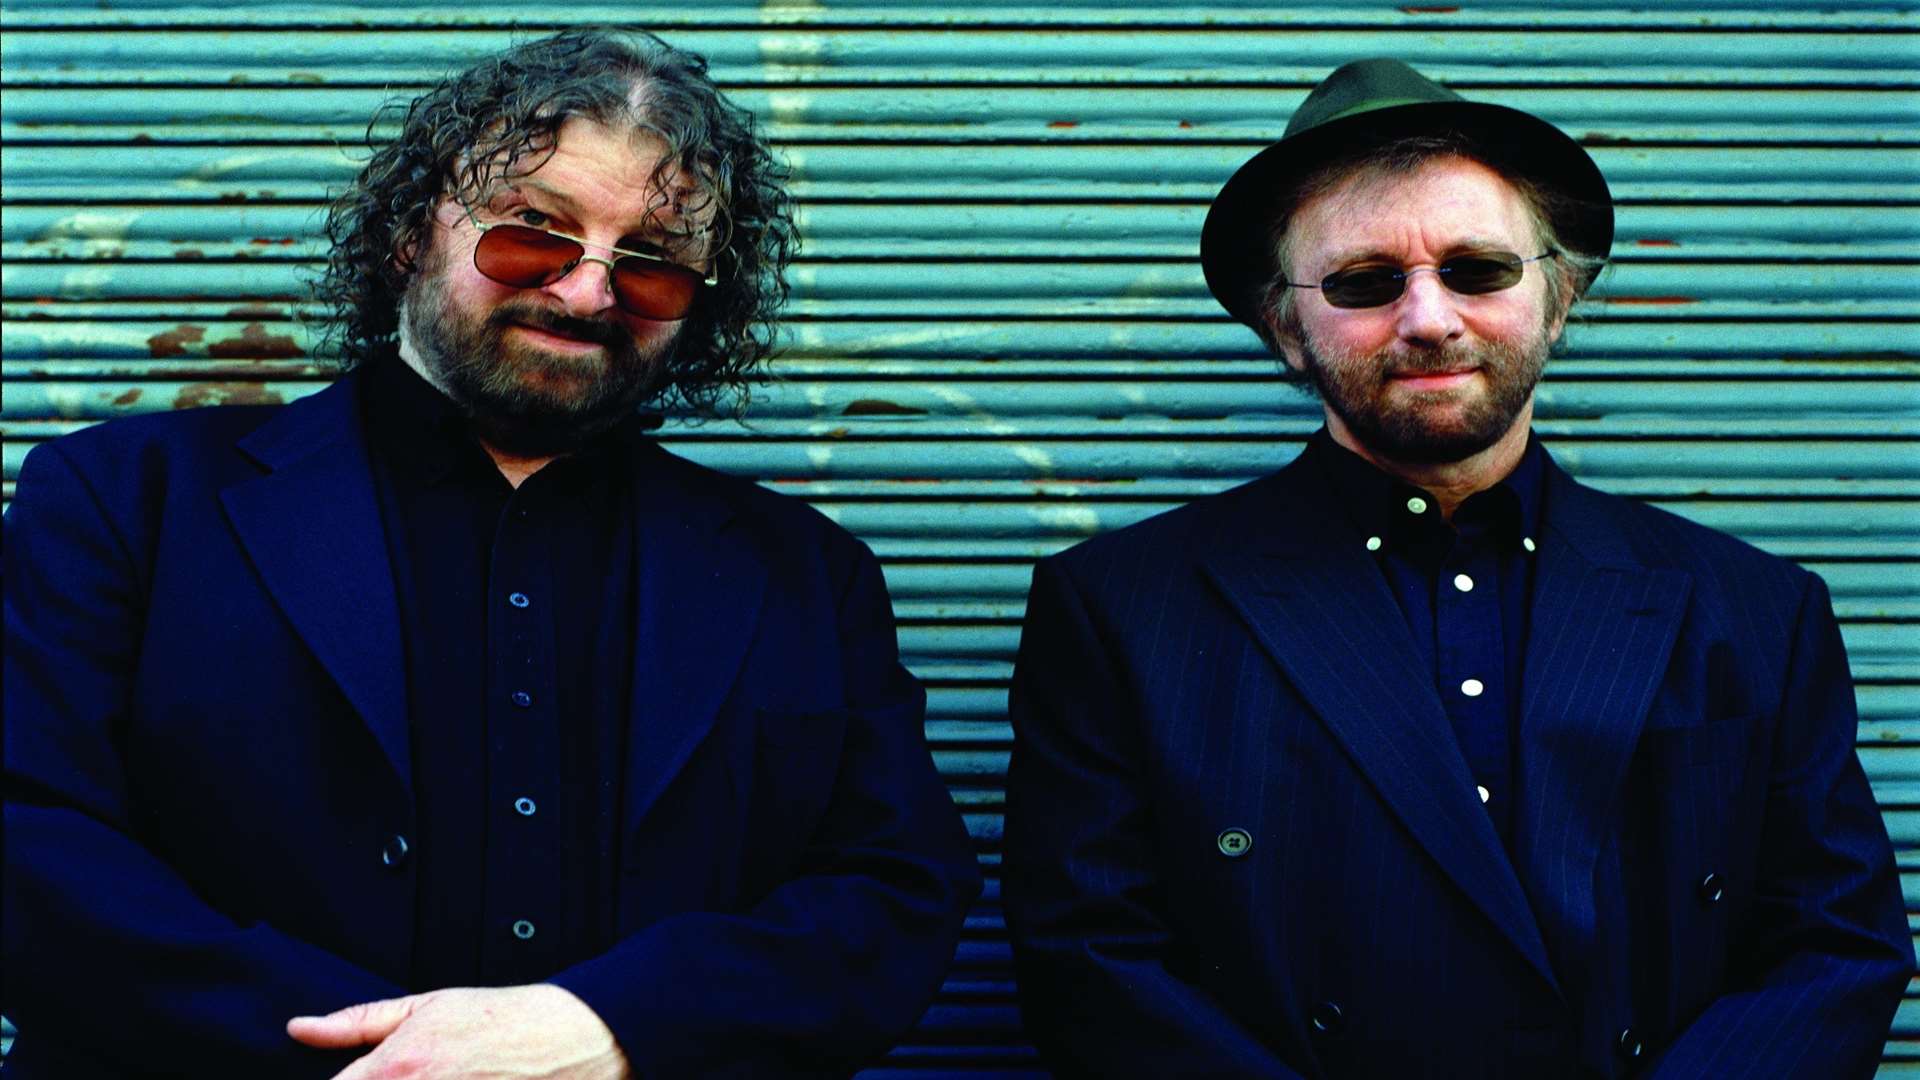 Chas and Dave will play Maidstone's Big Day Out